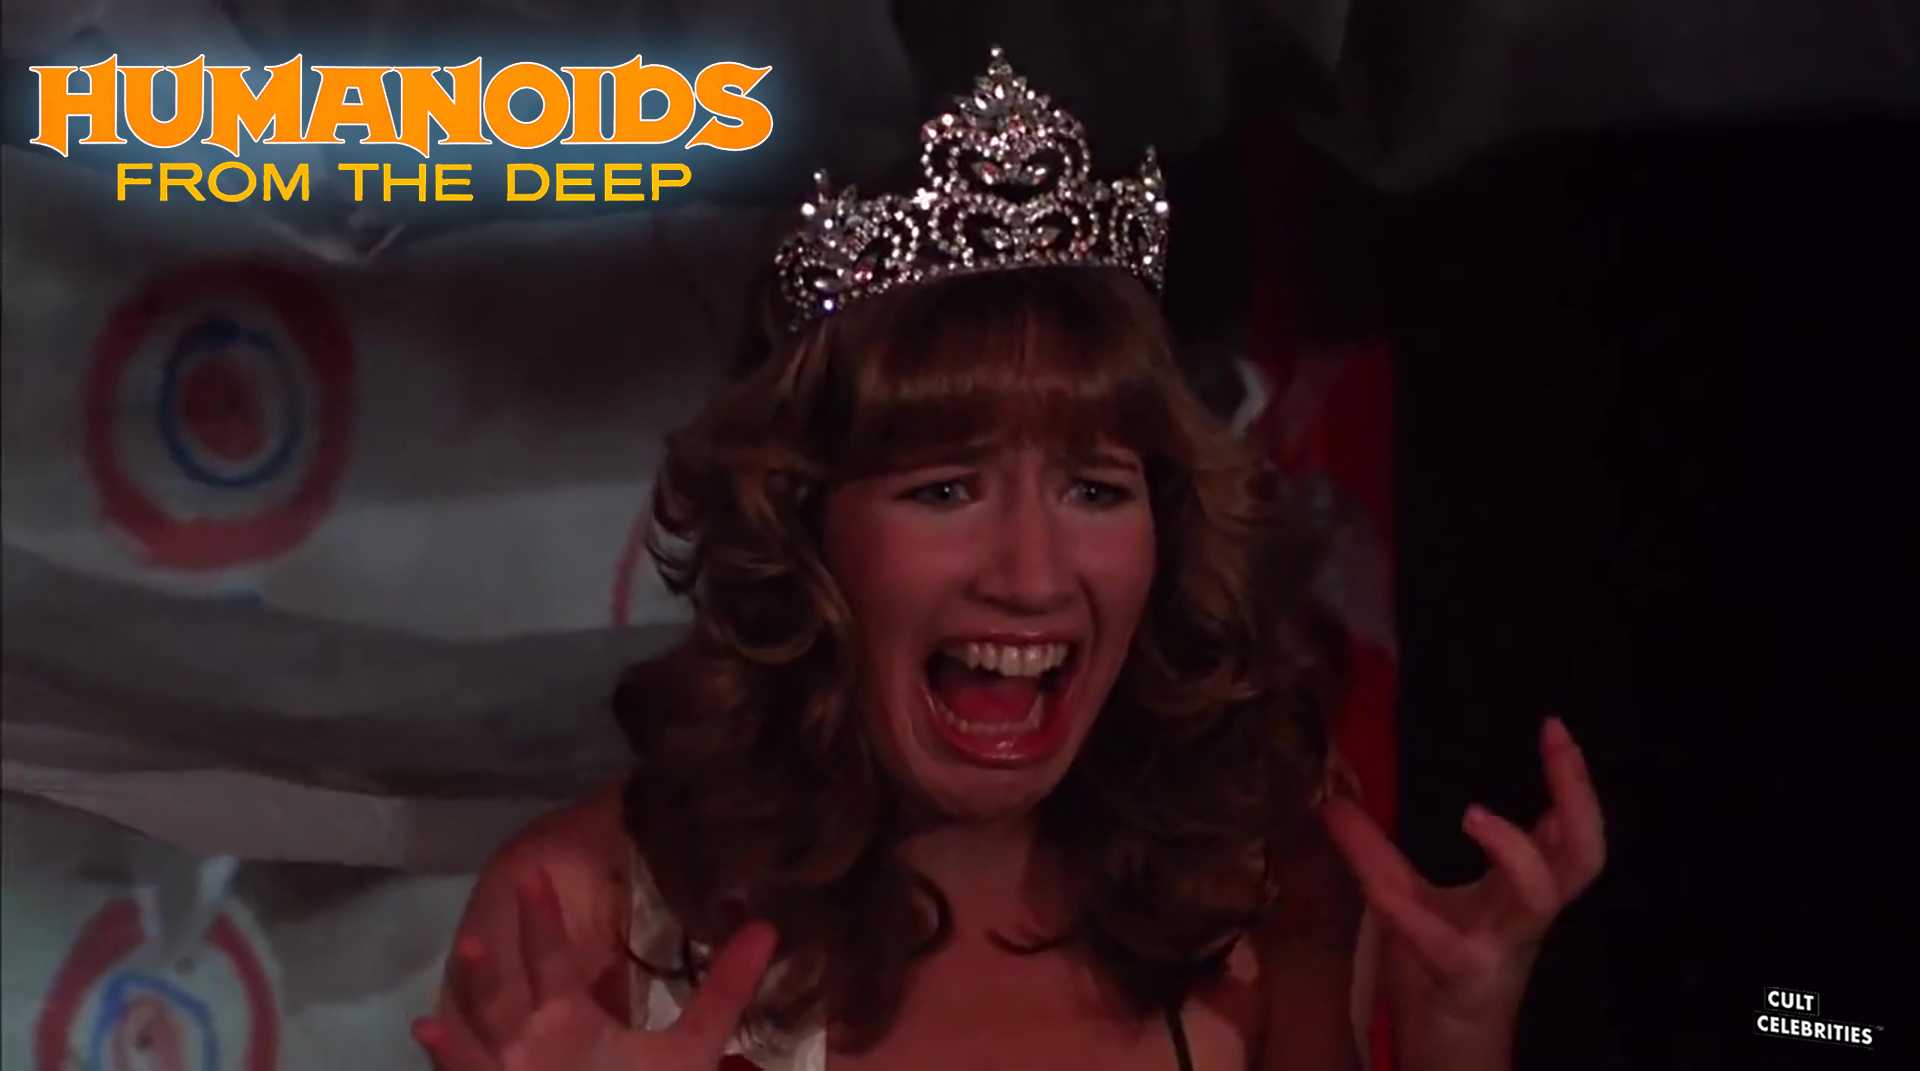 Linda Shayne in Humanoids from the Deep (1980)